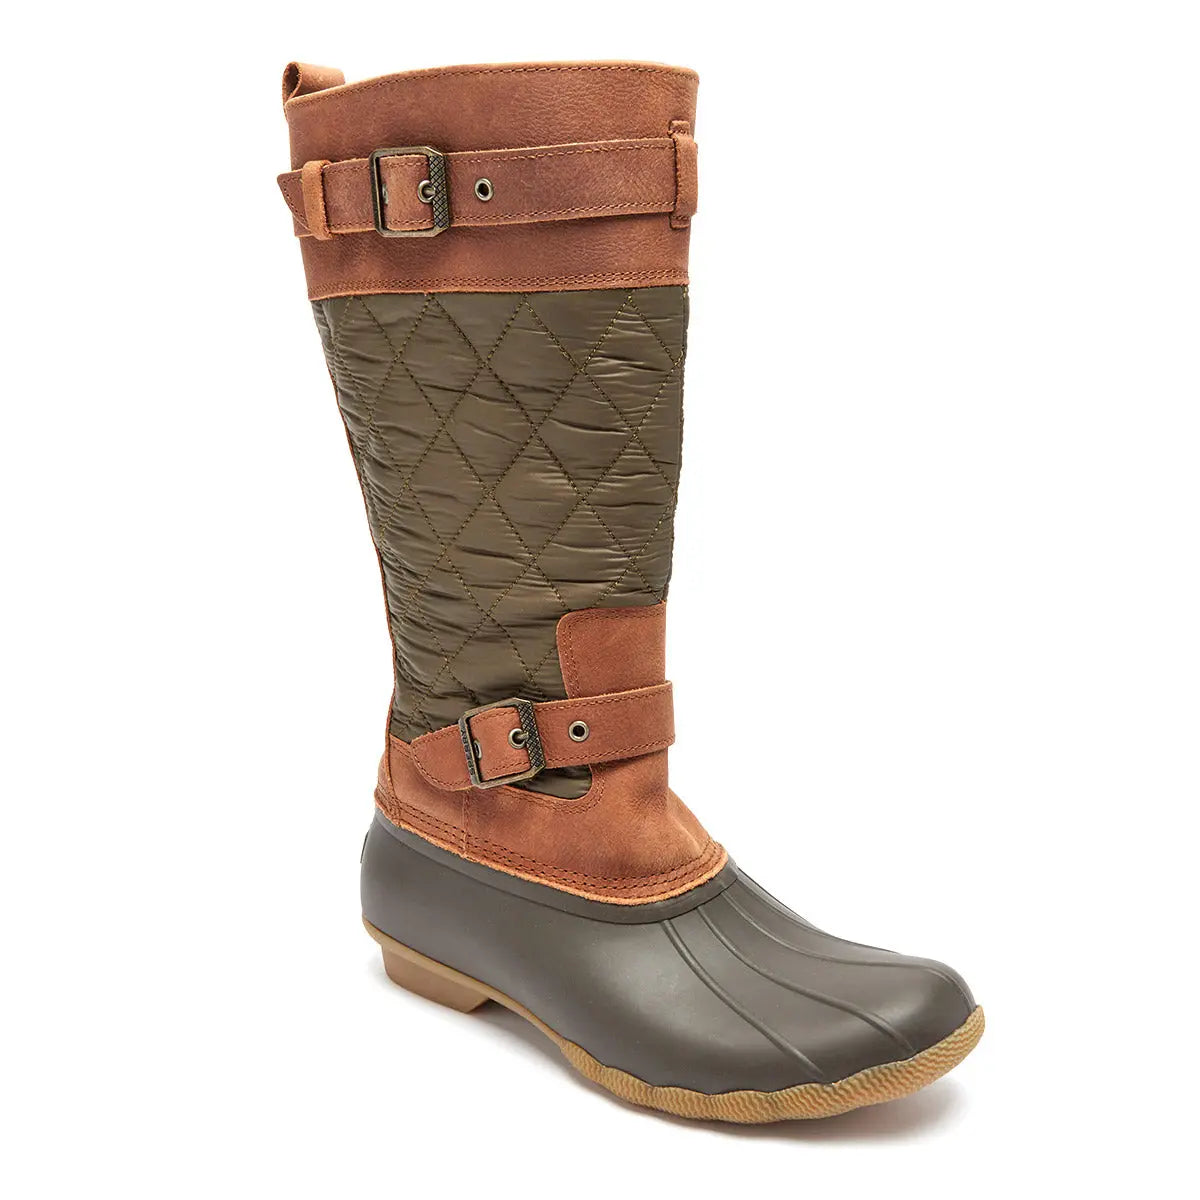 Image of Sperry Top-Sider Saltwater Tall Nylon Duck Boot